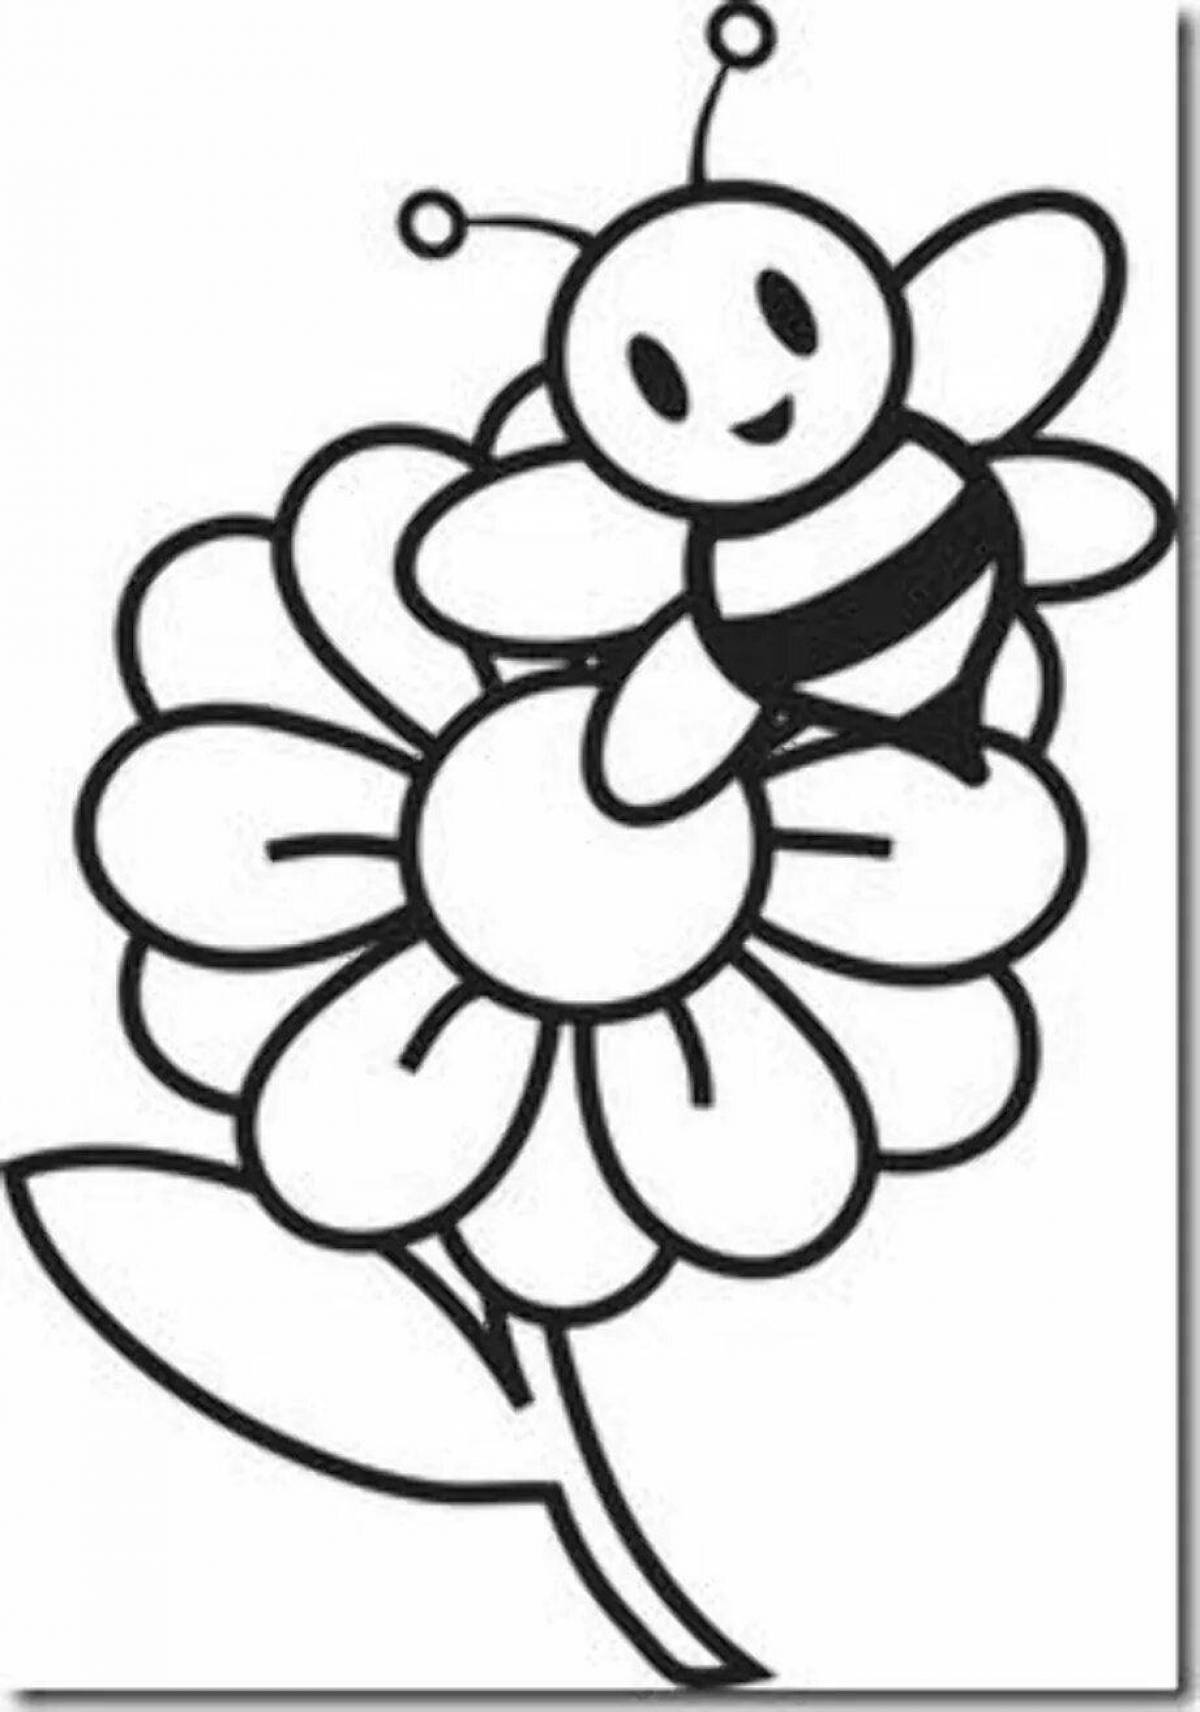 Coloring bee for kids